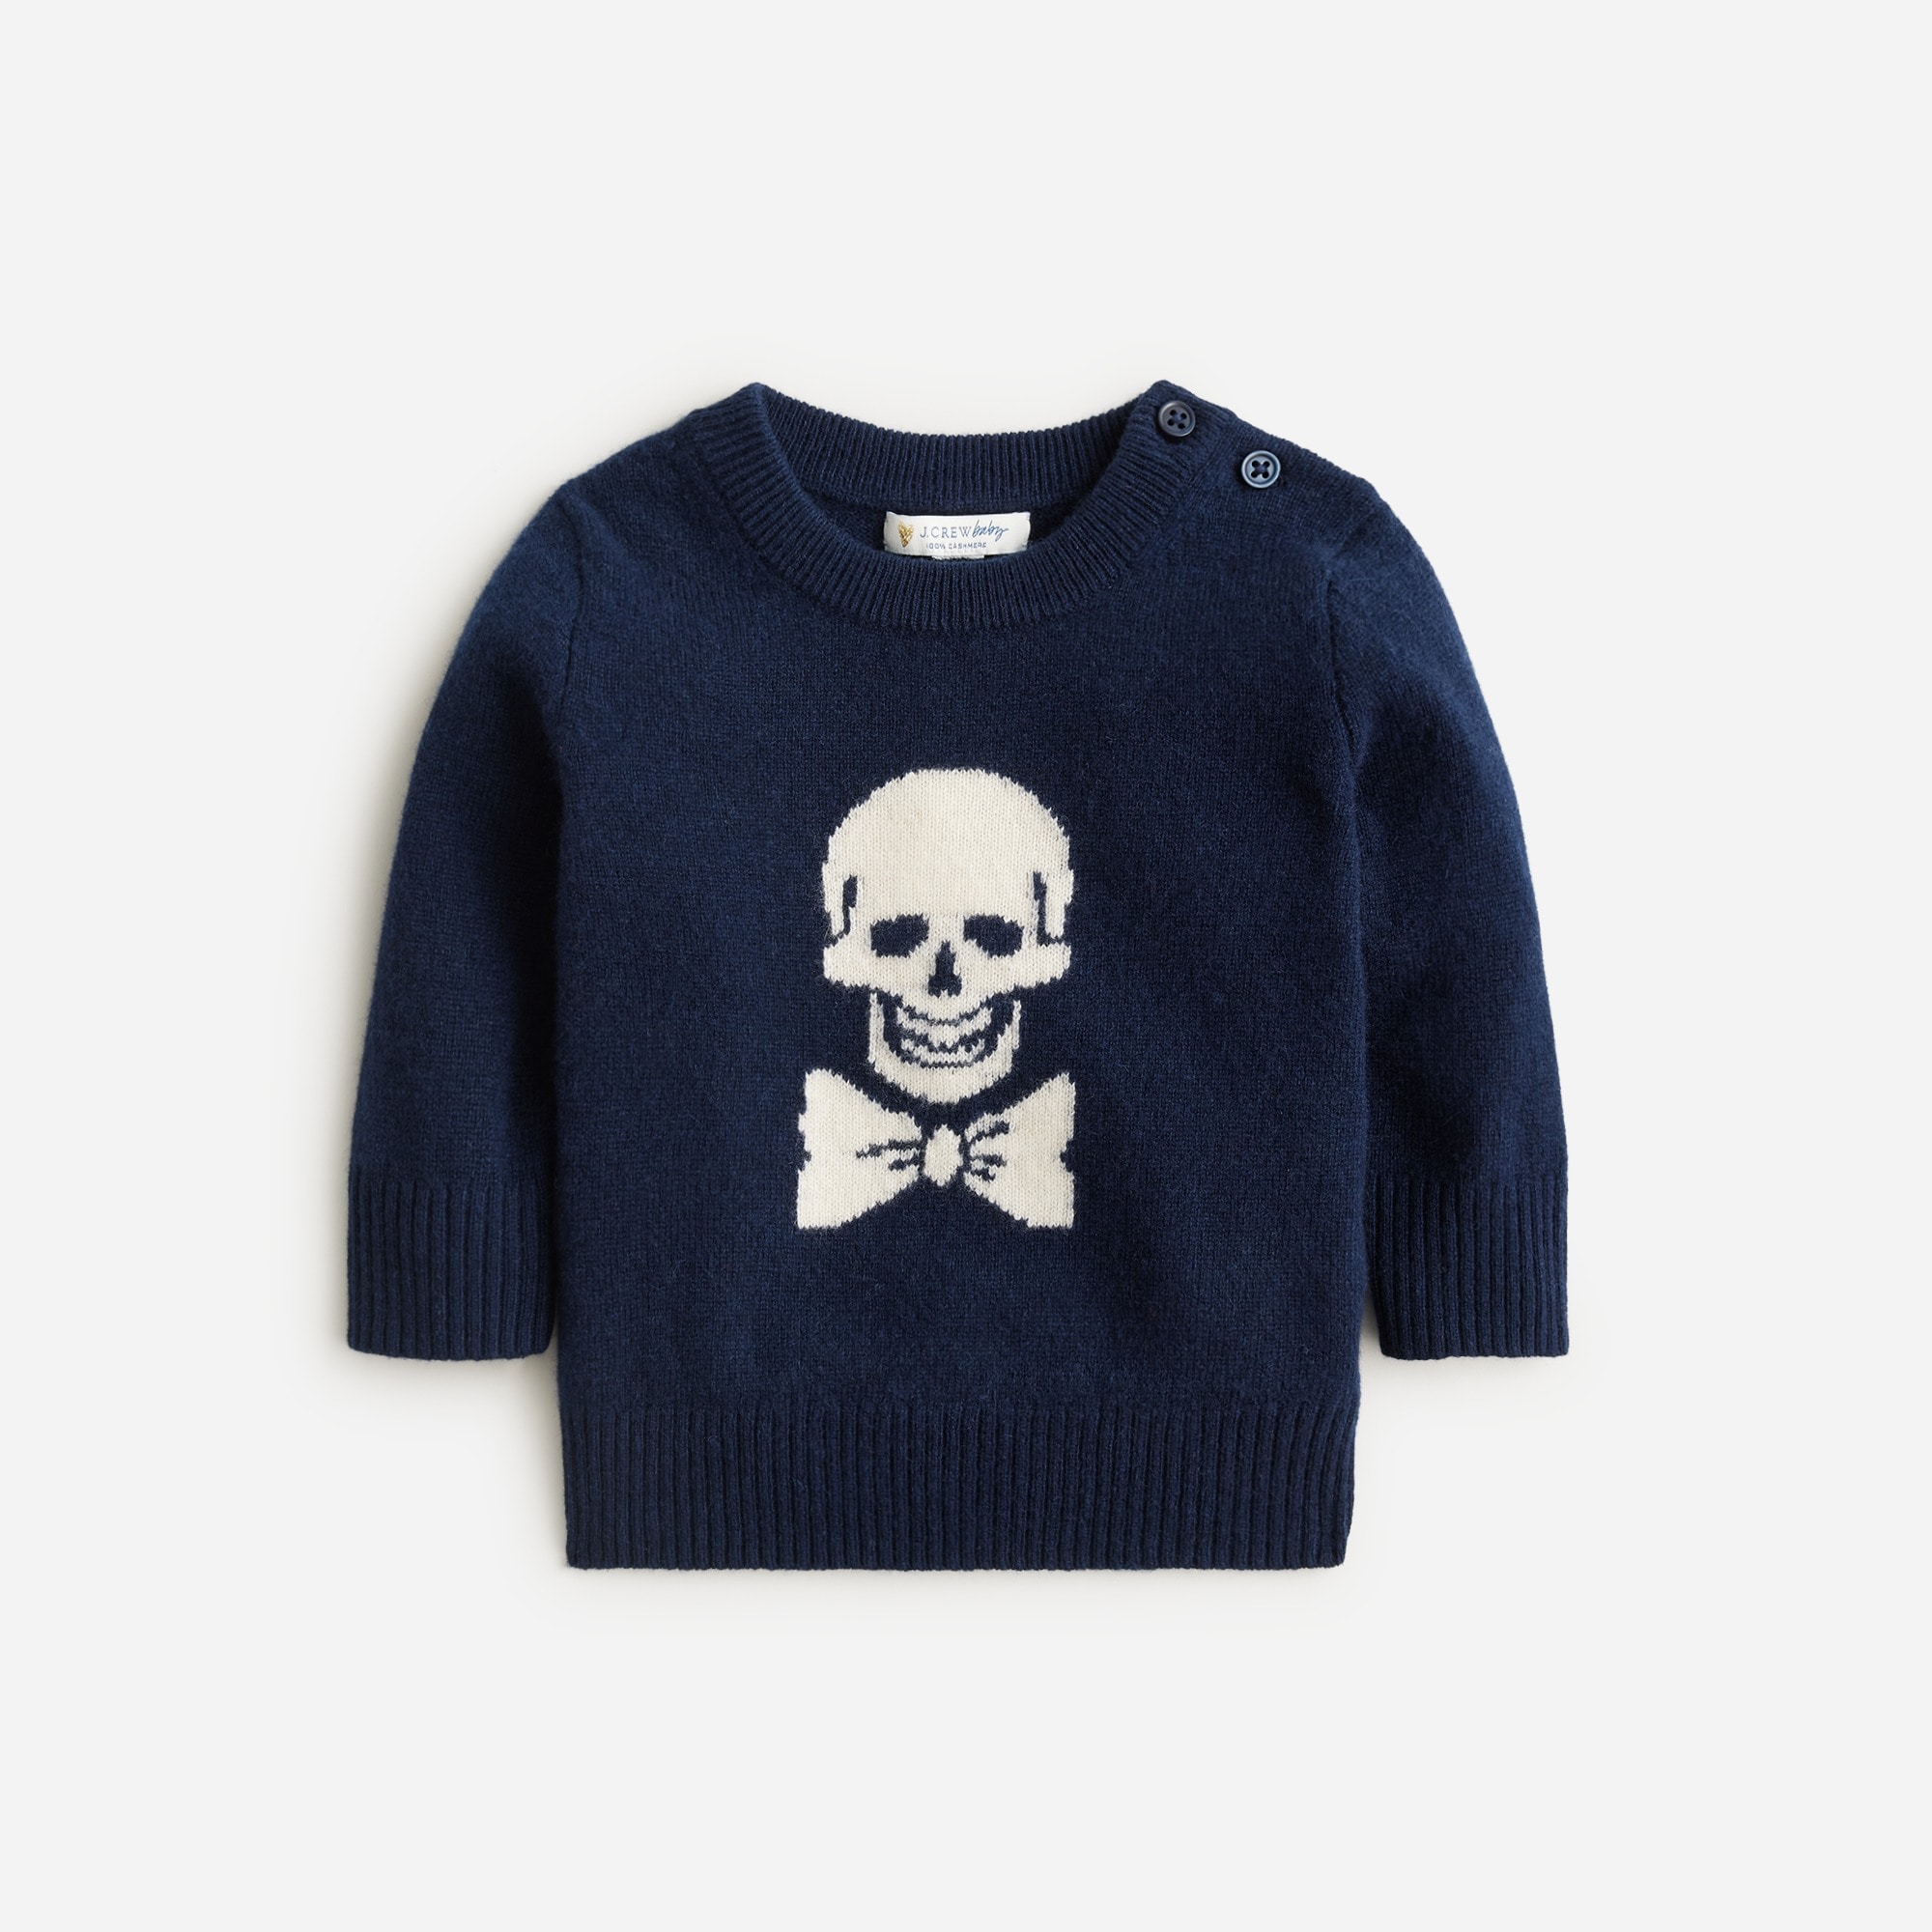 Jcrew Limited-edition baby cashmere skull crewneck sweater